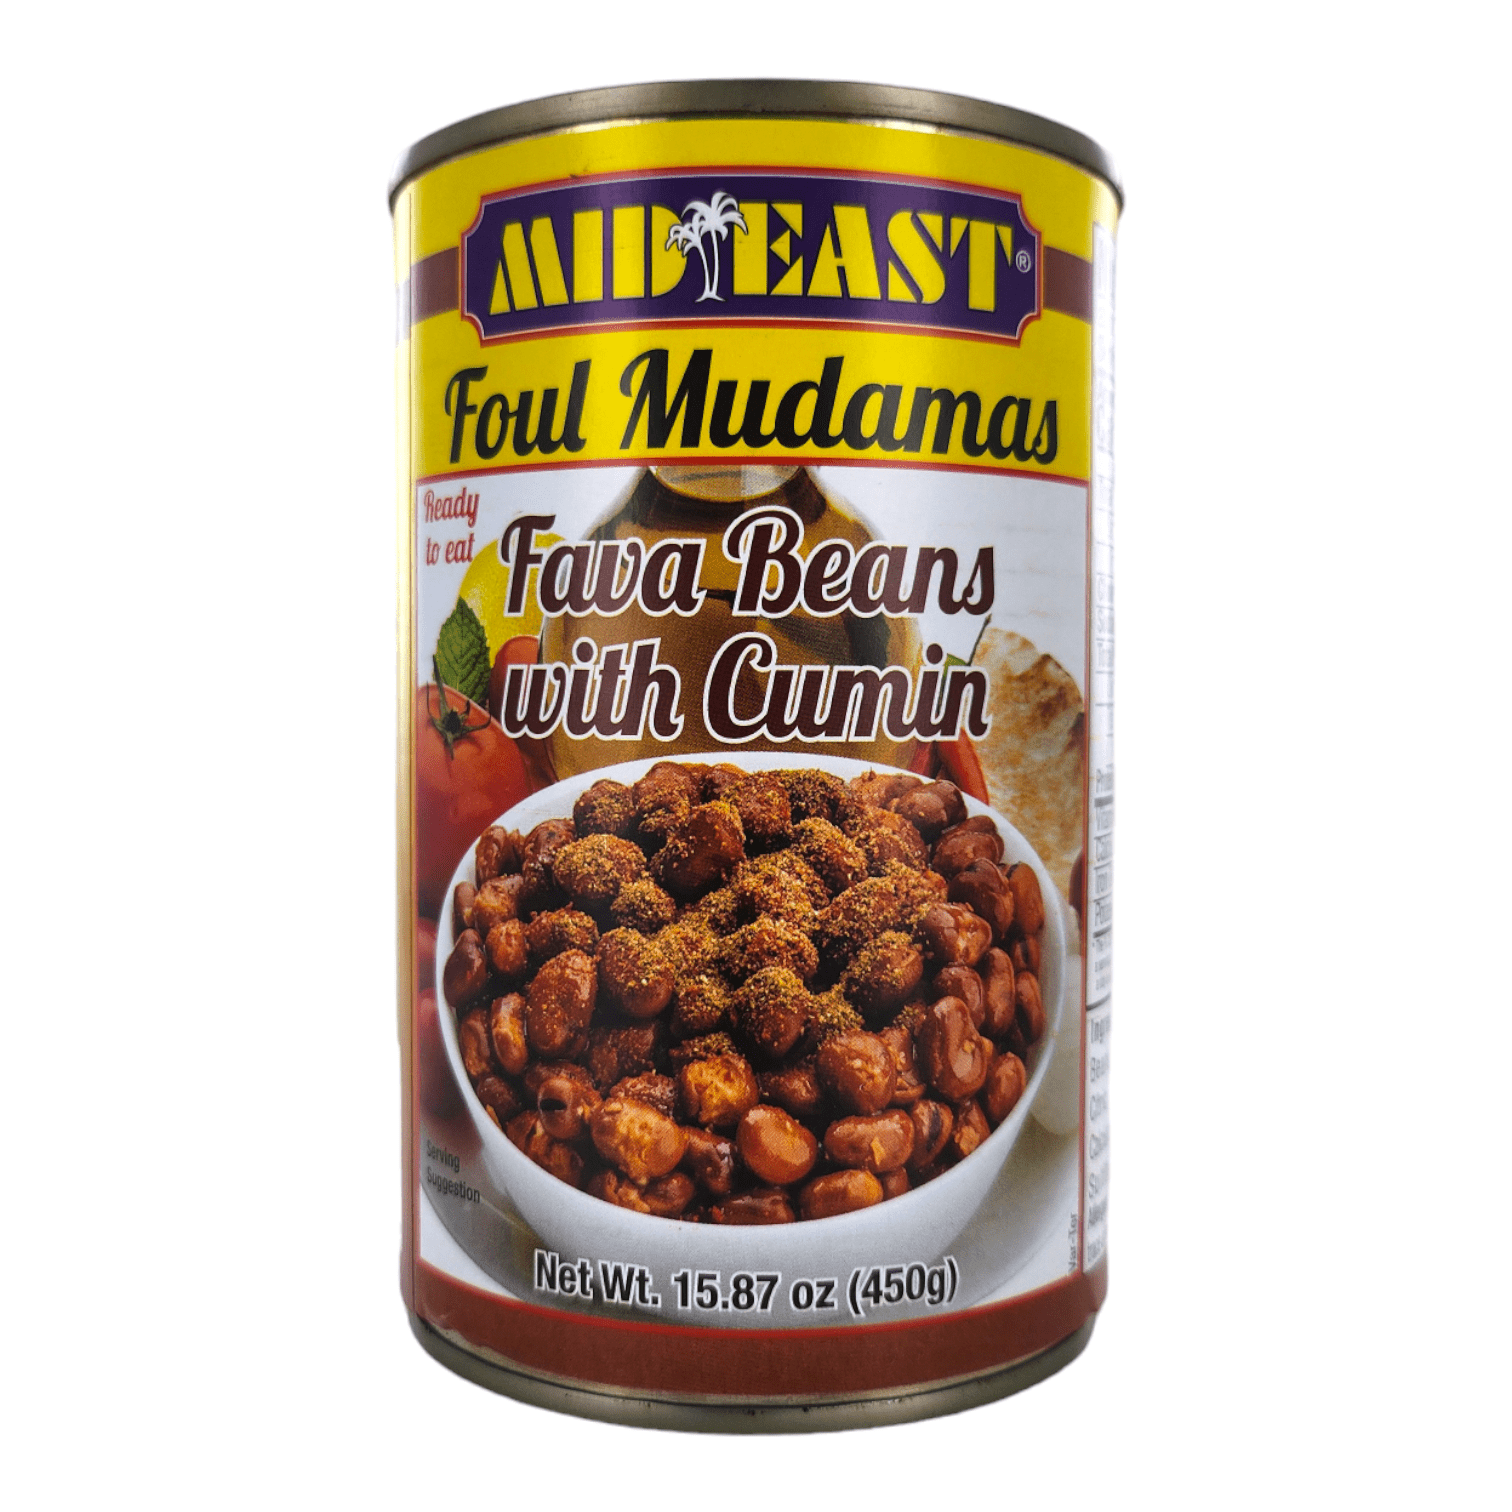 【6 Pack】Mid East Fava Beans with Cumin (Foul Mudamas) 15.87 oz (450g) - Mideast Grocers